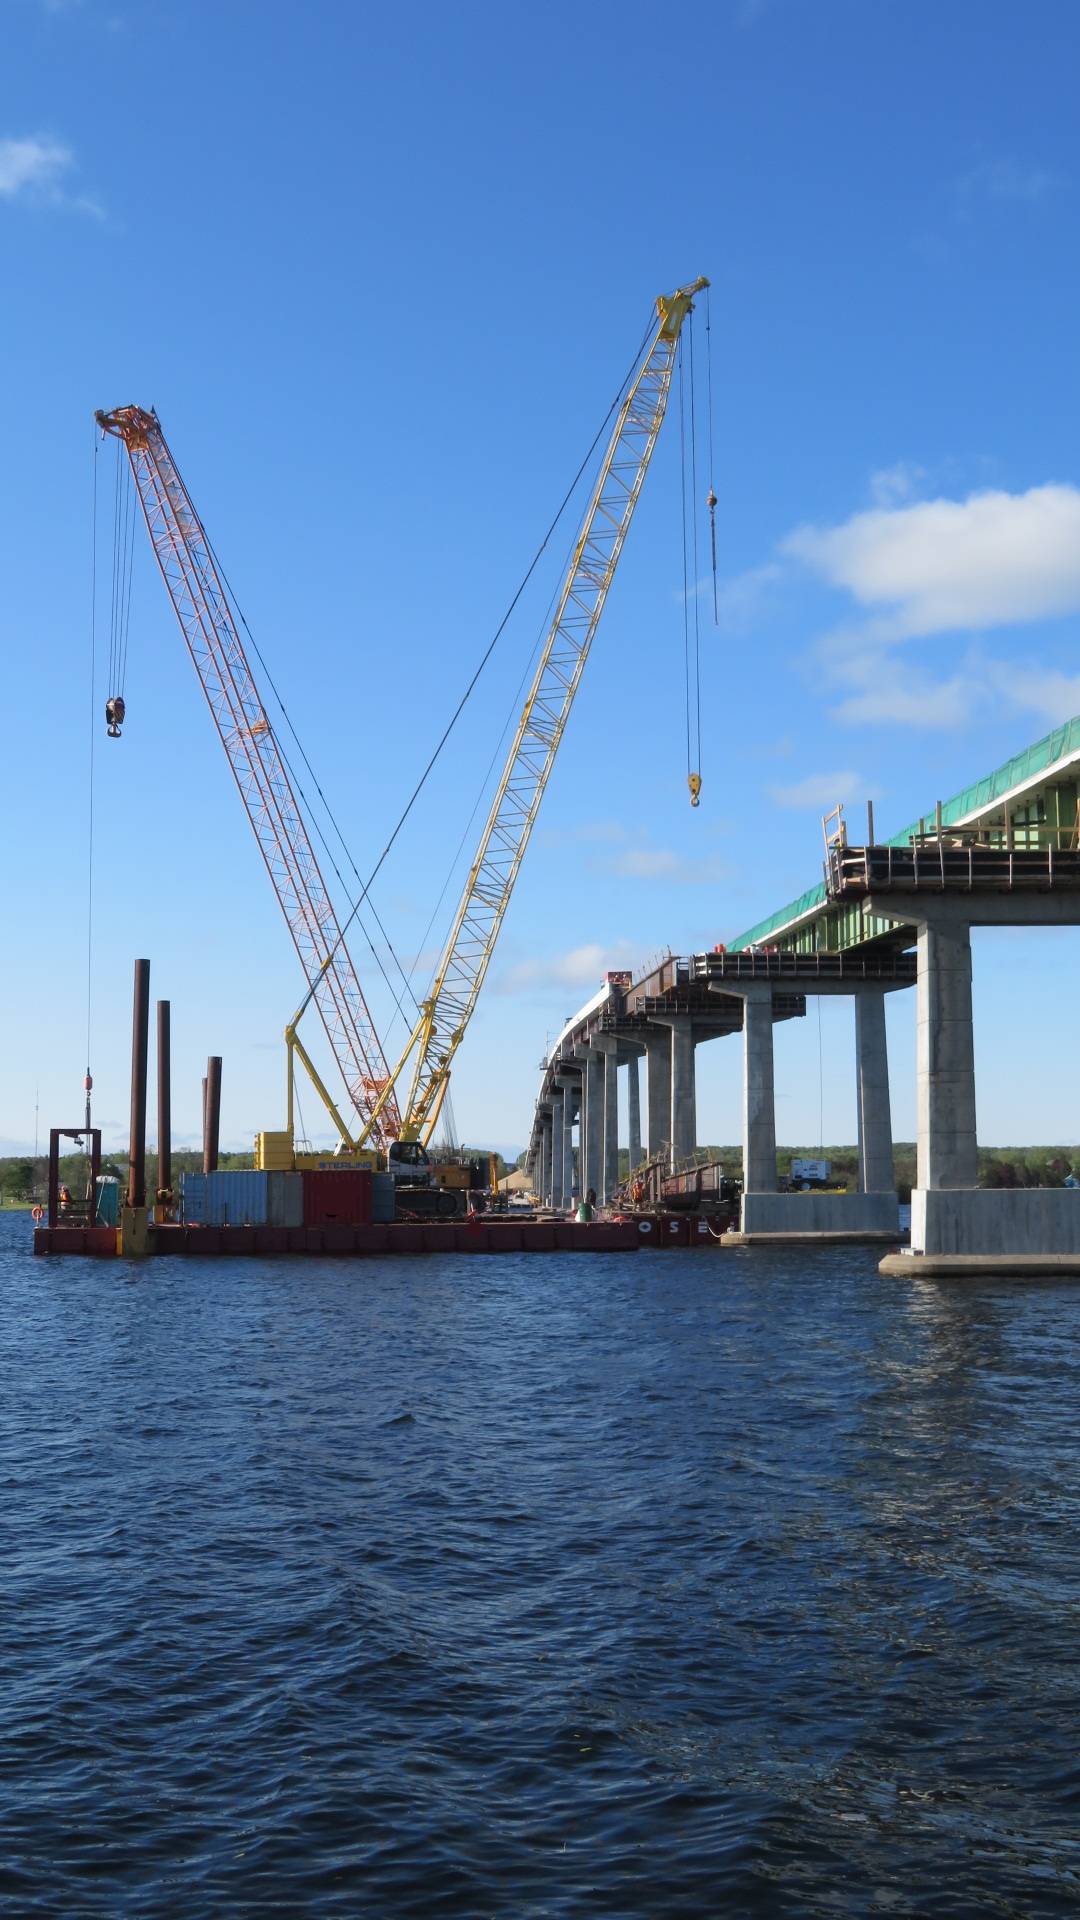 Both 200-ton cranes and barges preparing for girder lift